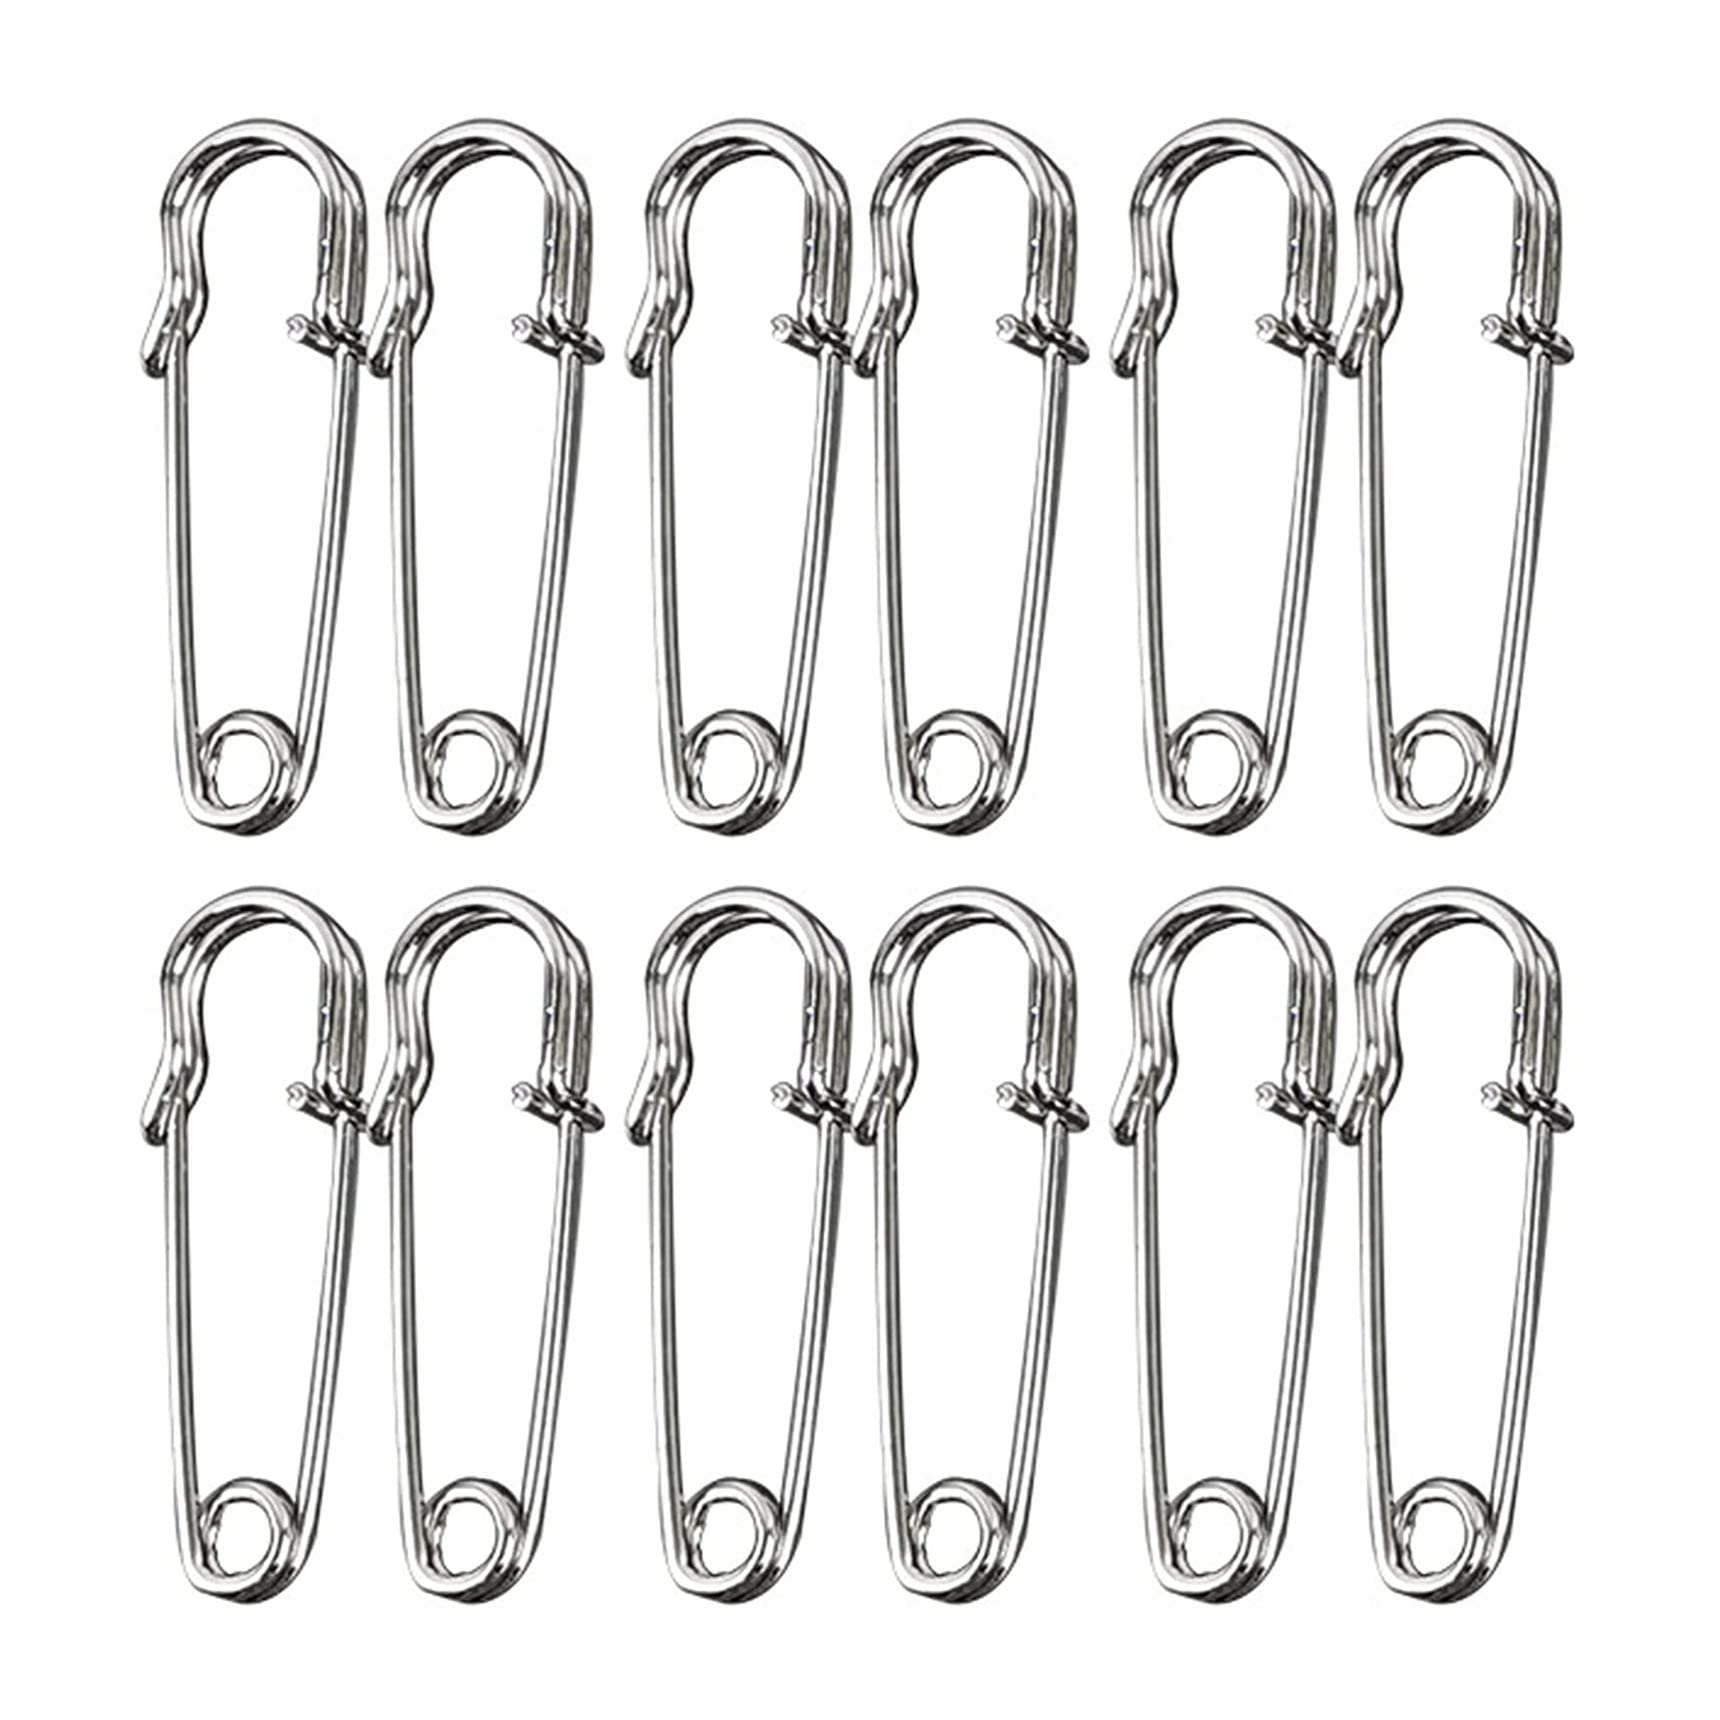 Large Safety Pins Large Safety Pins Heavy Duty Safety Pins for